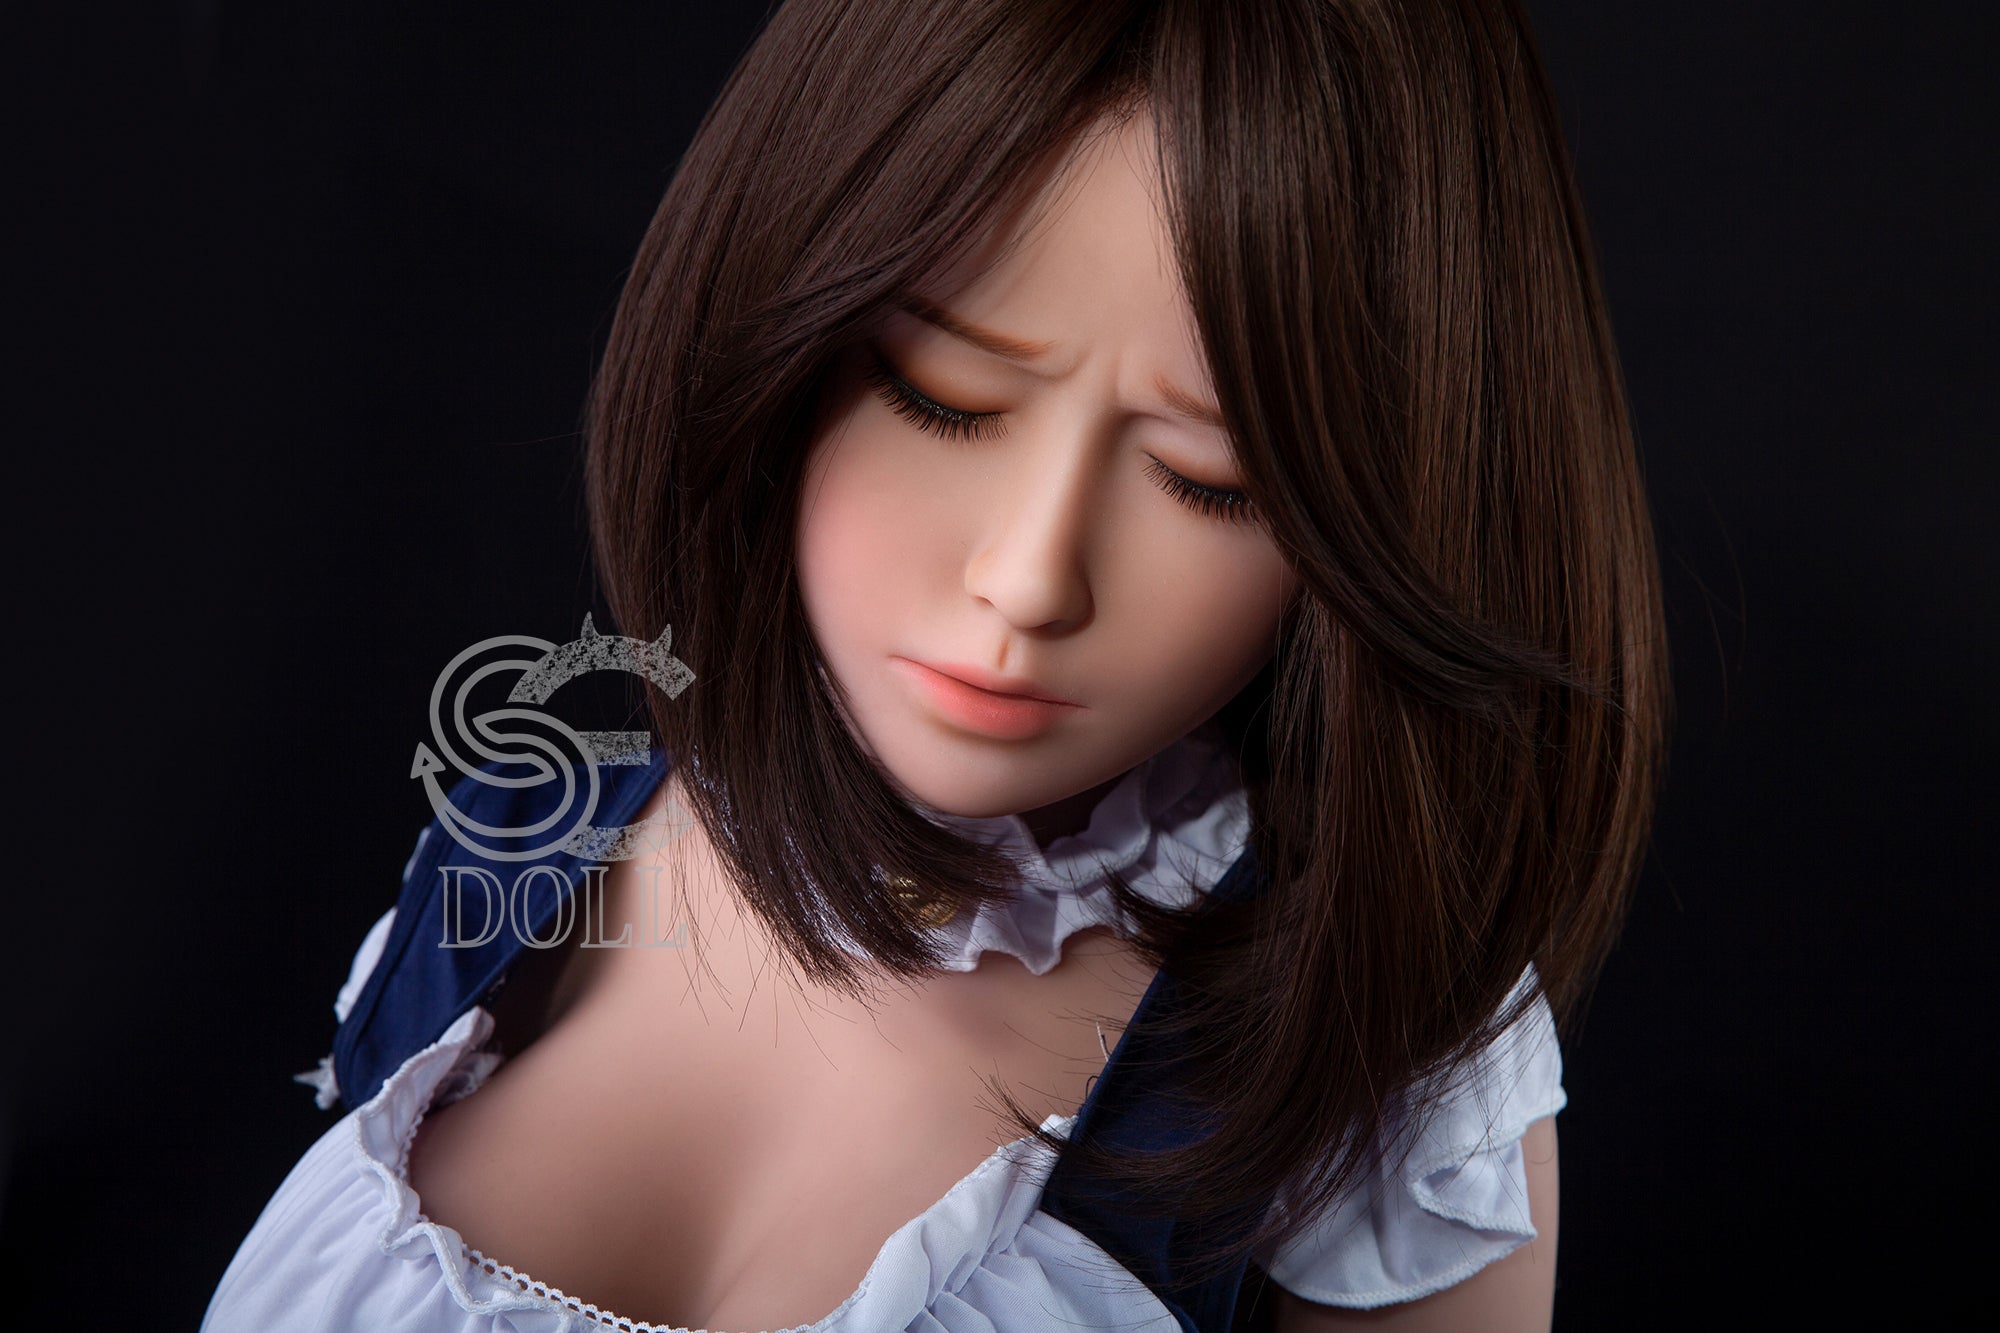 SEDOLL 151 cm E TPE - Lilith | Buy Sex Dolls at DOLLS ACTUALLY